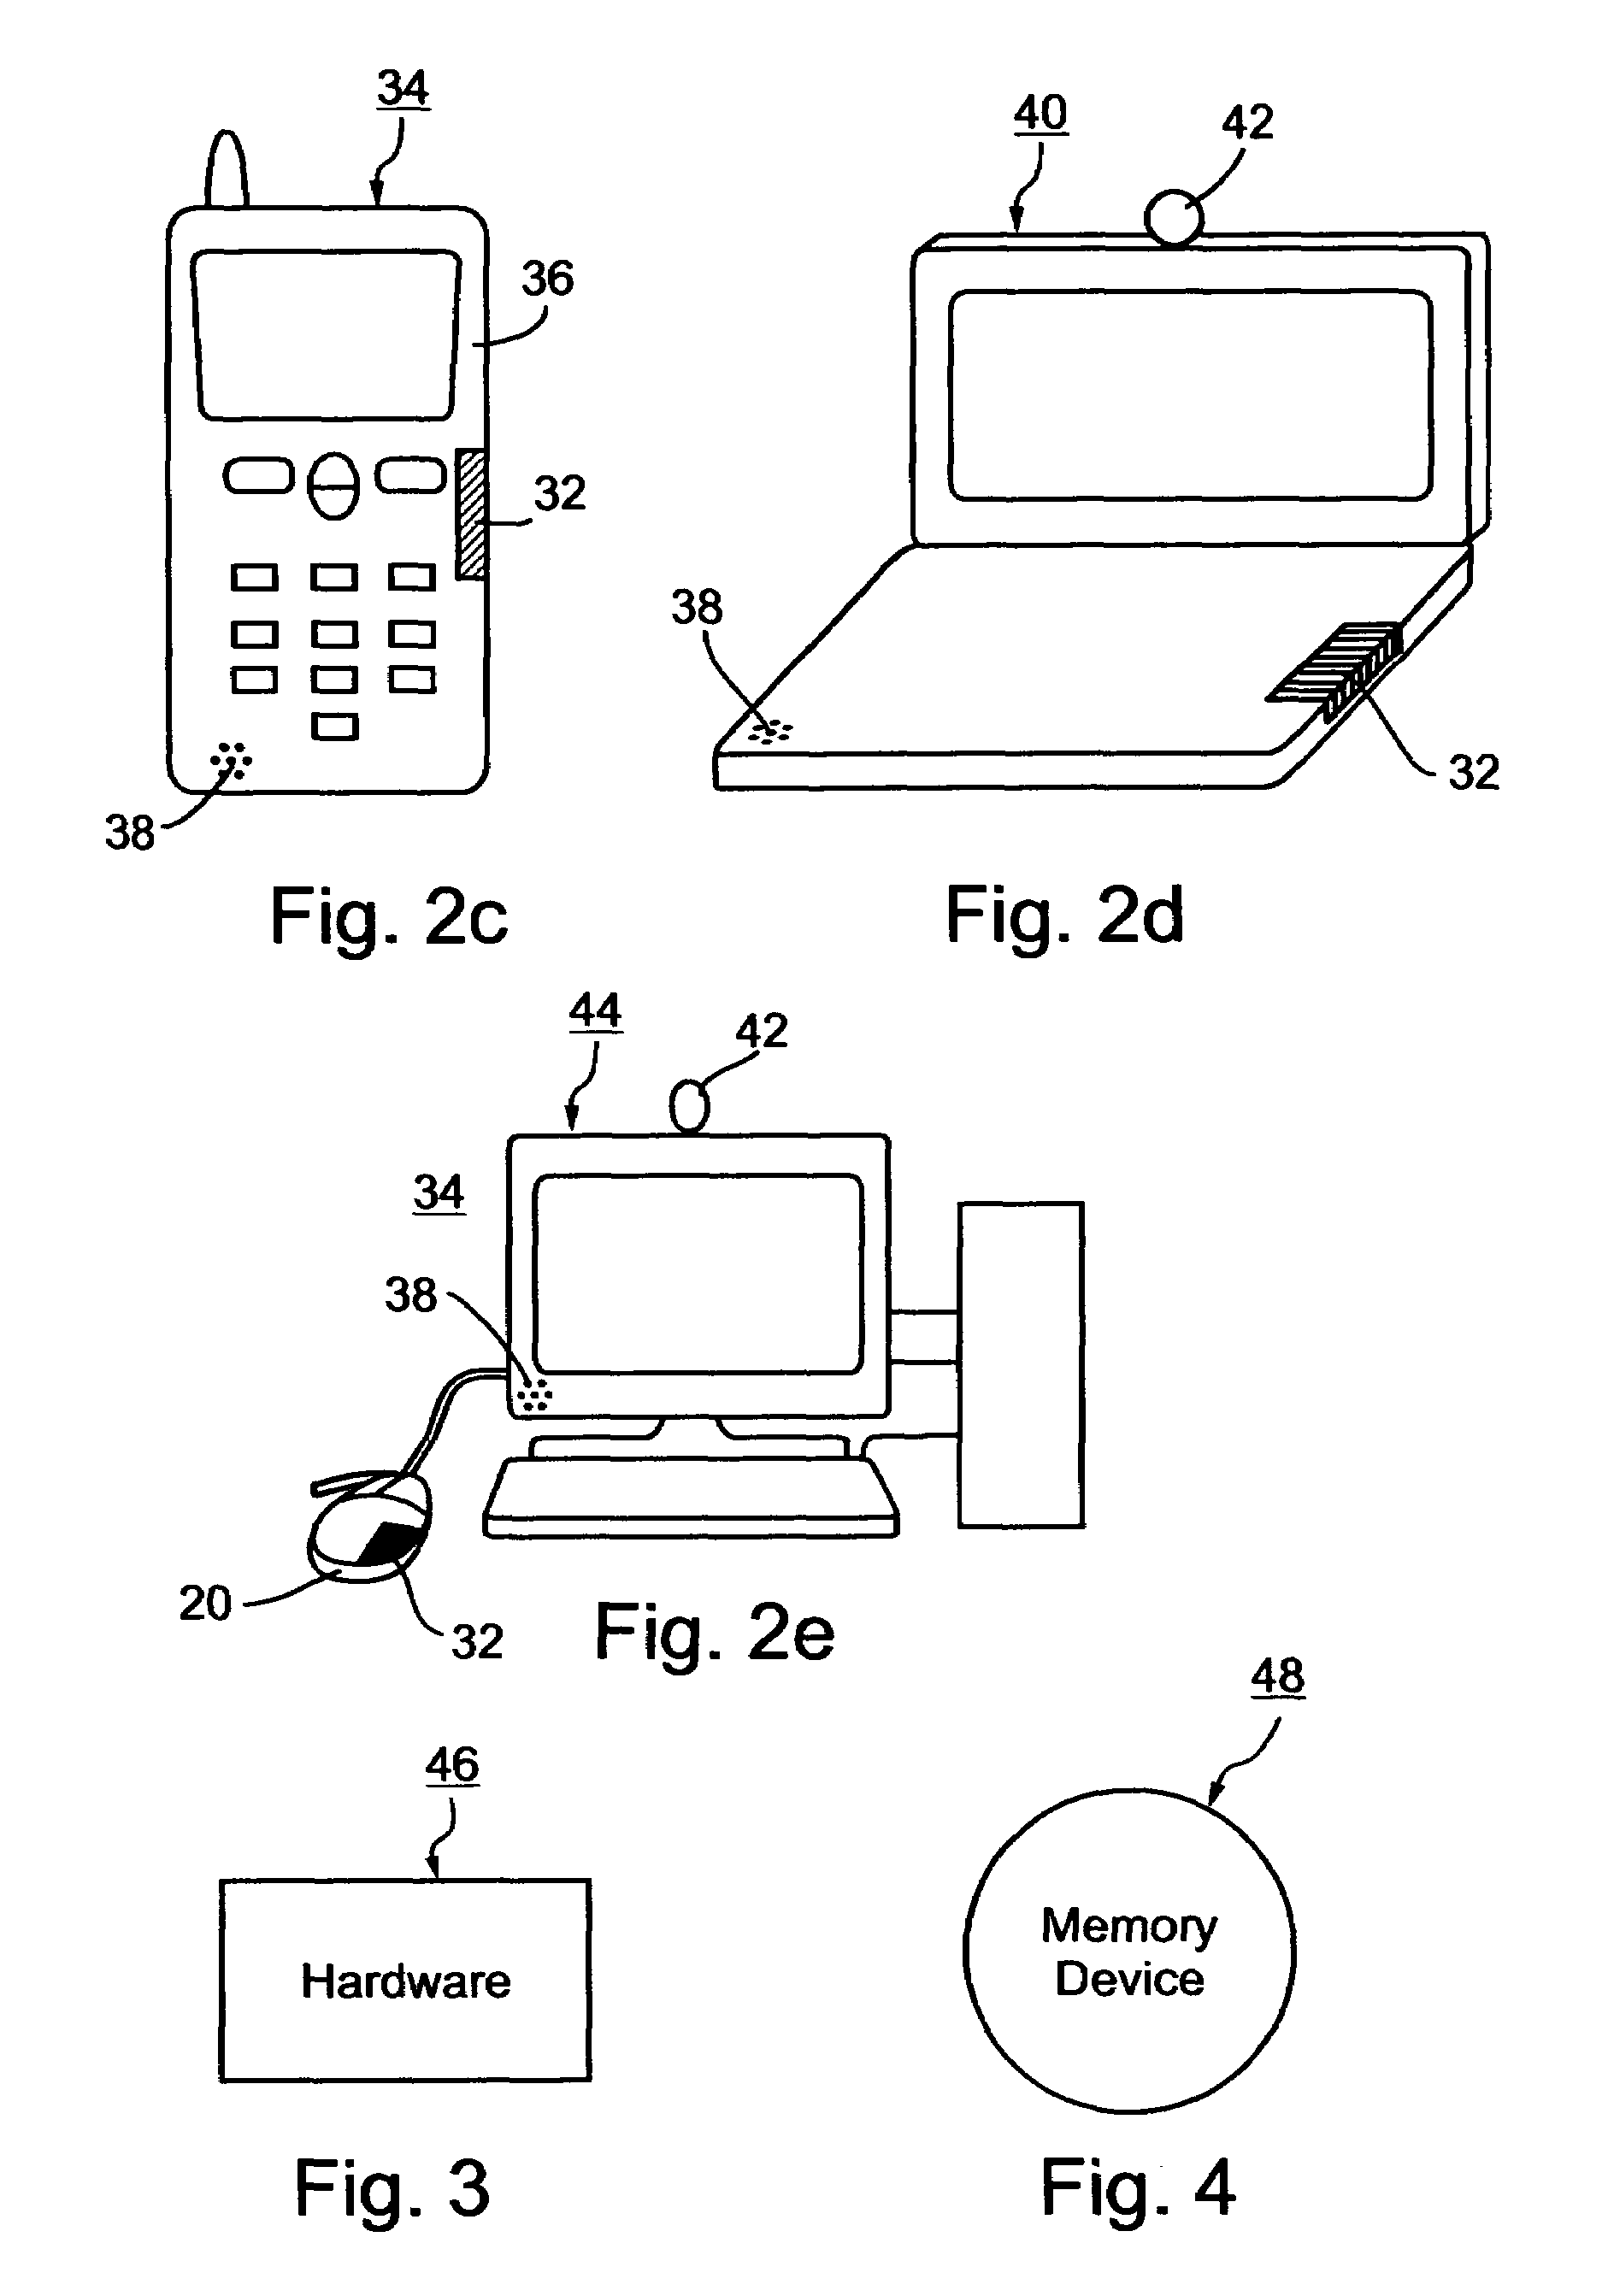 Method and apparatus for automatic control of access